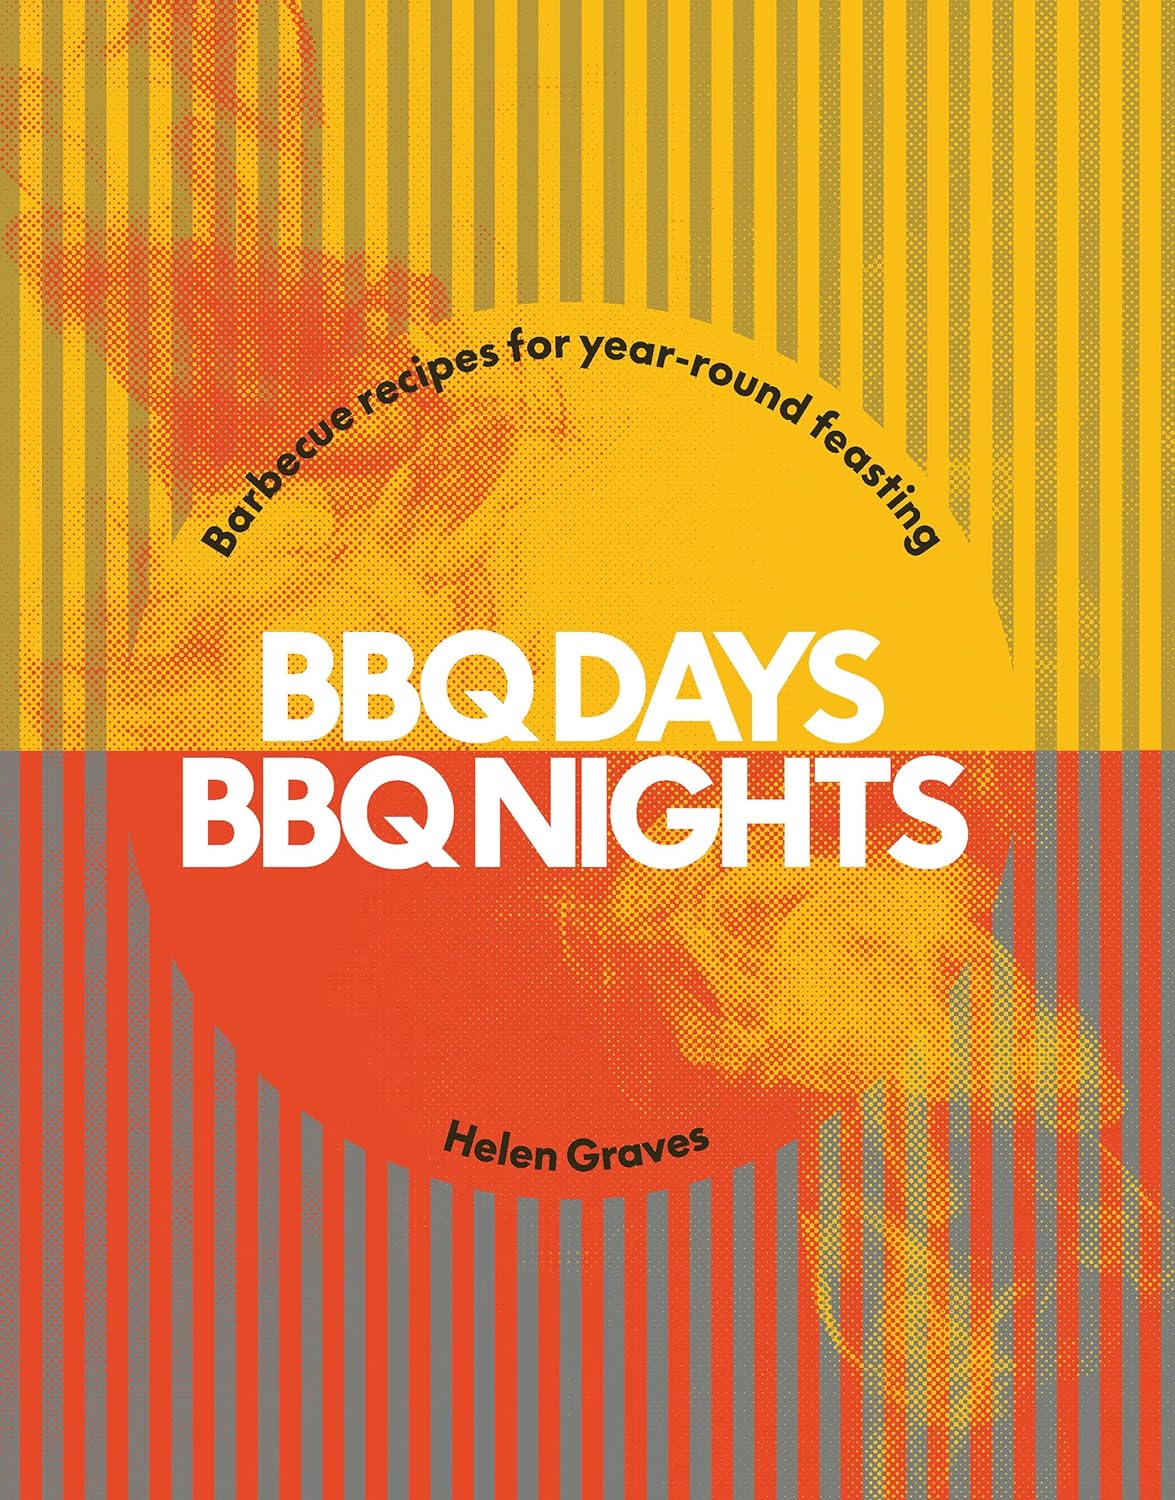 BBQ Days, BBQ Nights: Barbecue recipes for year-round feasting (Helen Graves)